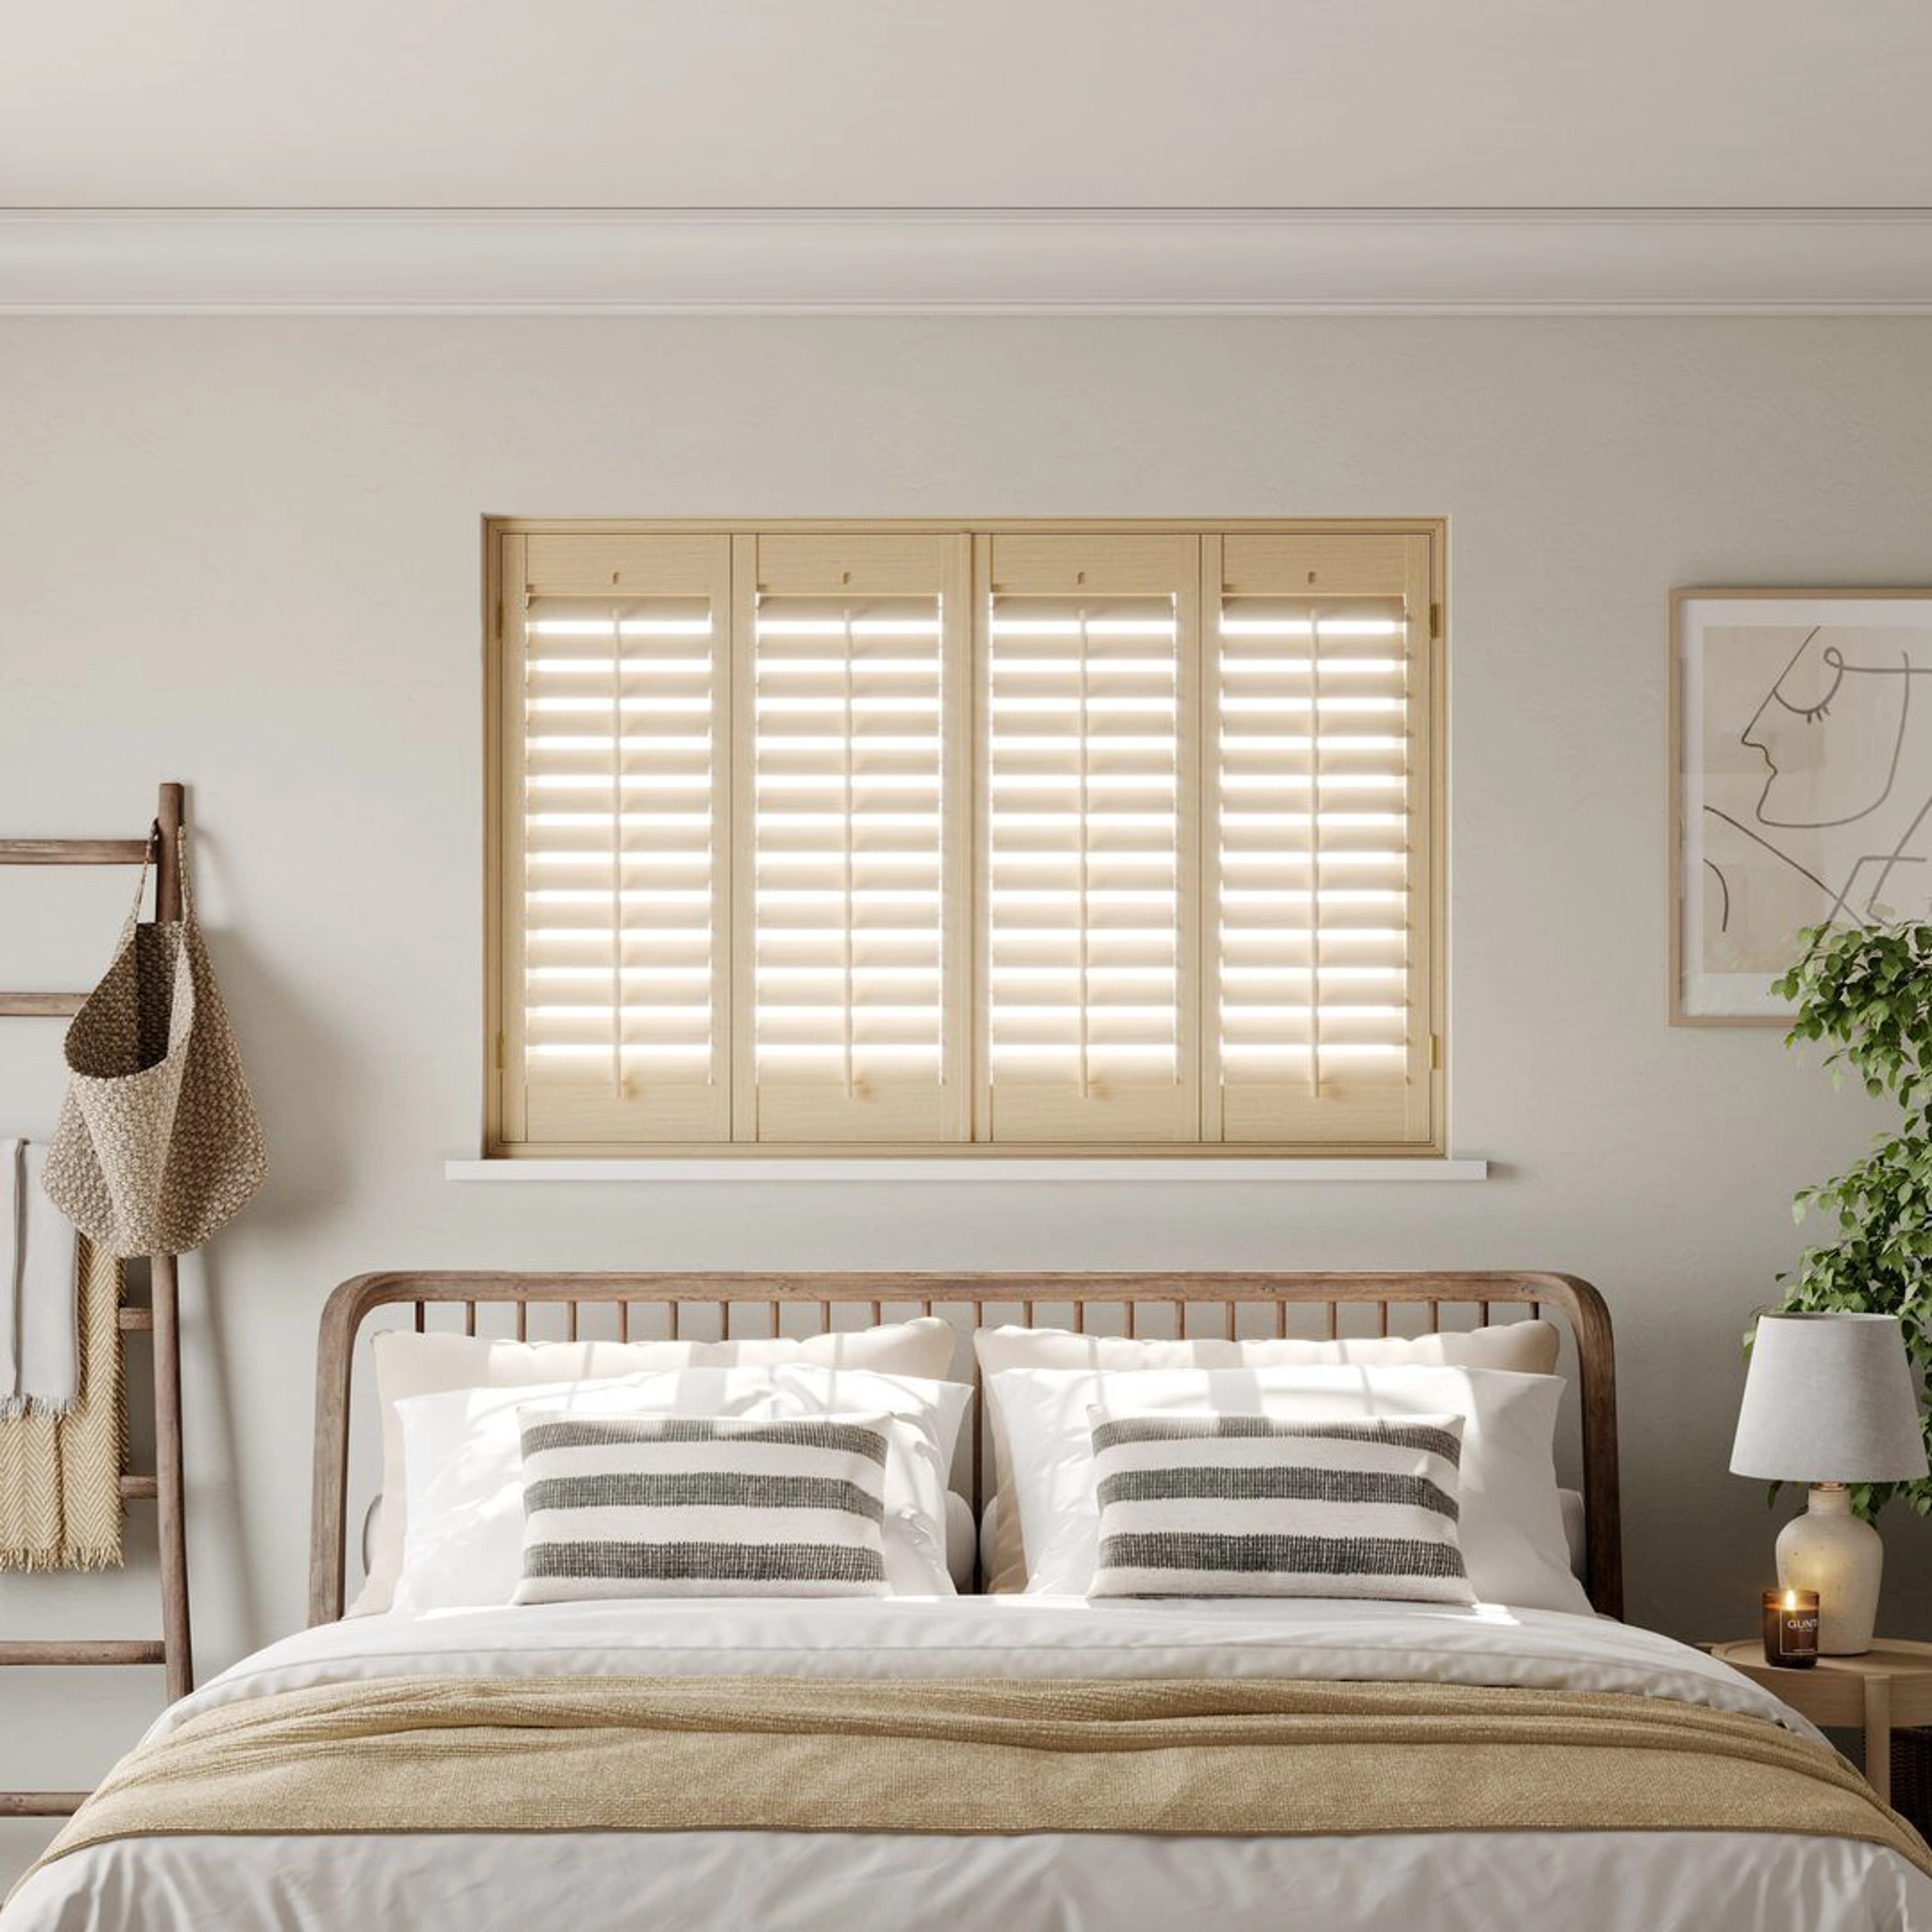 A modern neutral bedroom with Natural Stained full height wooden shutters